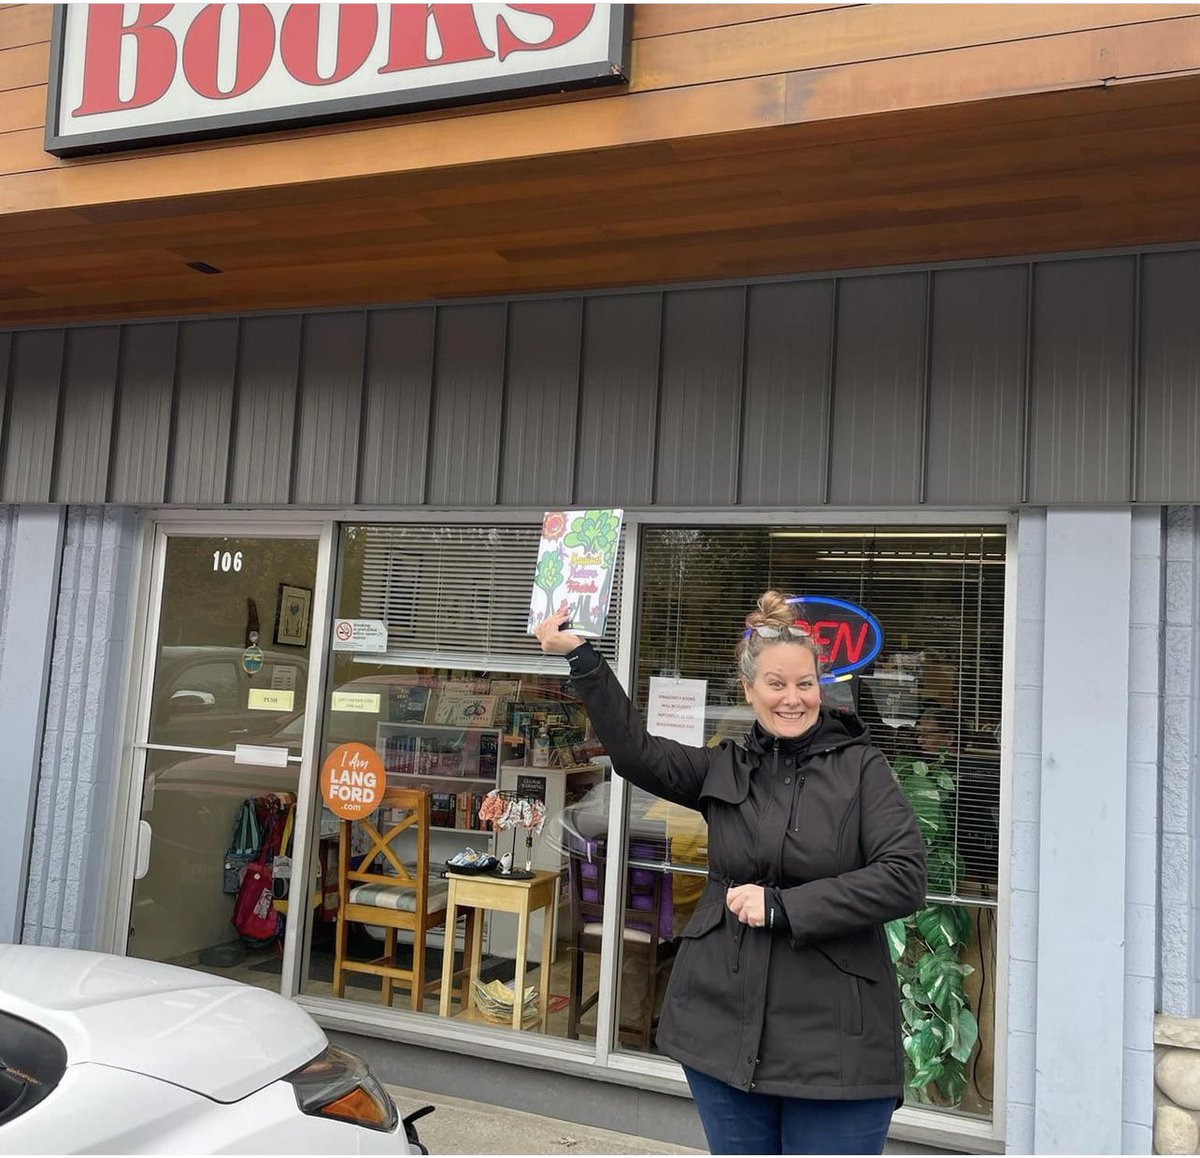 🎉Support #indieauthors and #indiebookstores today, Sat April 27th, for #indiebookstoreday2024!
Thank-you to @FriesenPress and 
all the local stores @russellbooks #booksandshenanigans #ivysbookstore #dragonflybooks for #supporting my #childrensbook #magicalnaturefriends 📕😊☀️📚